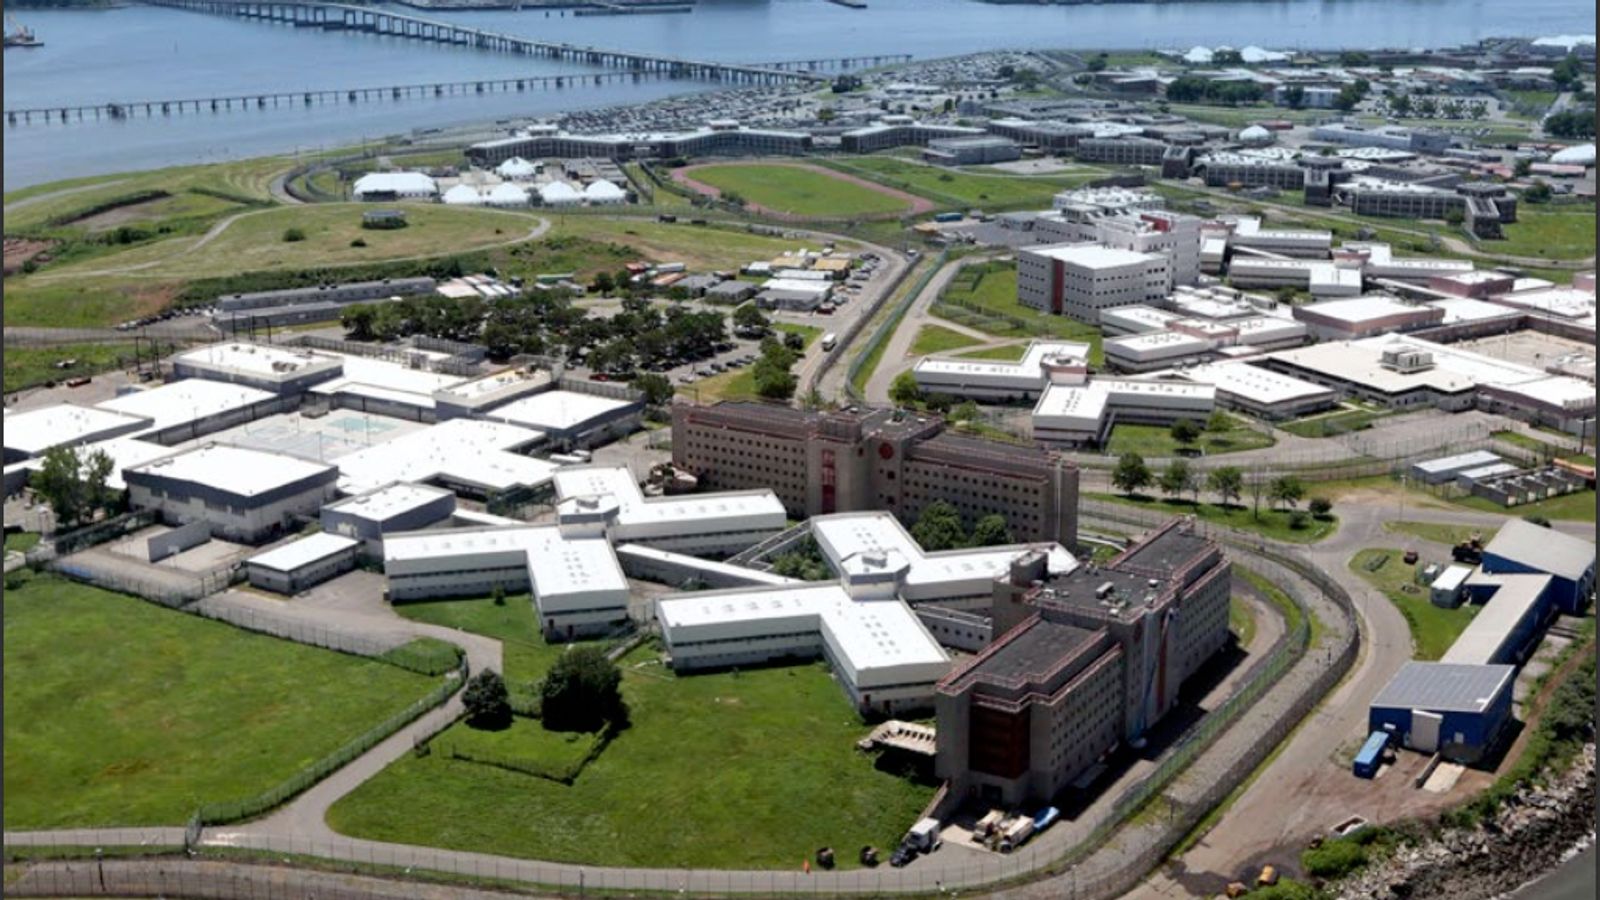 In Bid to Close Rikers Island, NYC Panel Suggests Decriminalizing Prostitution